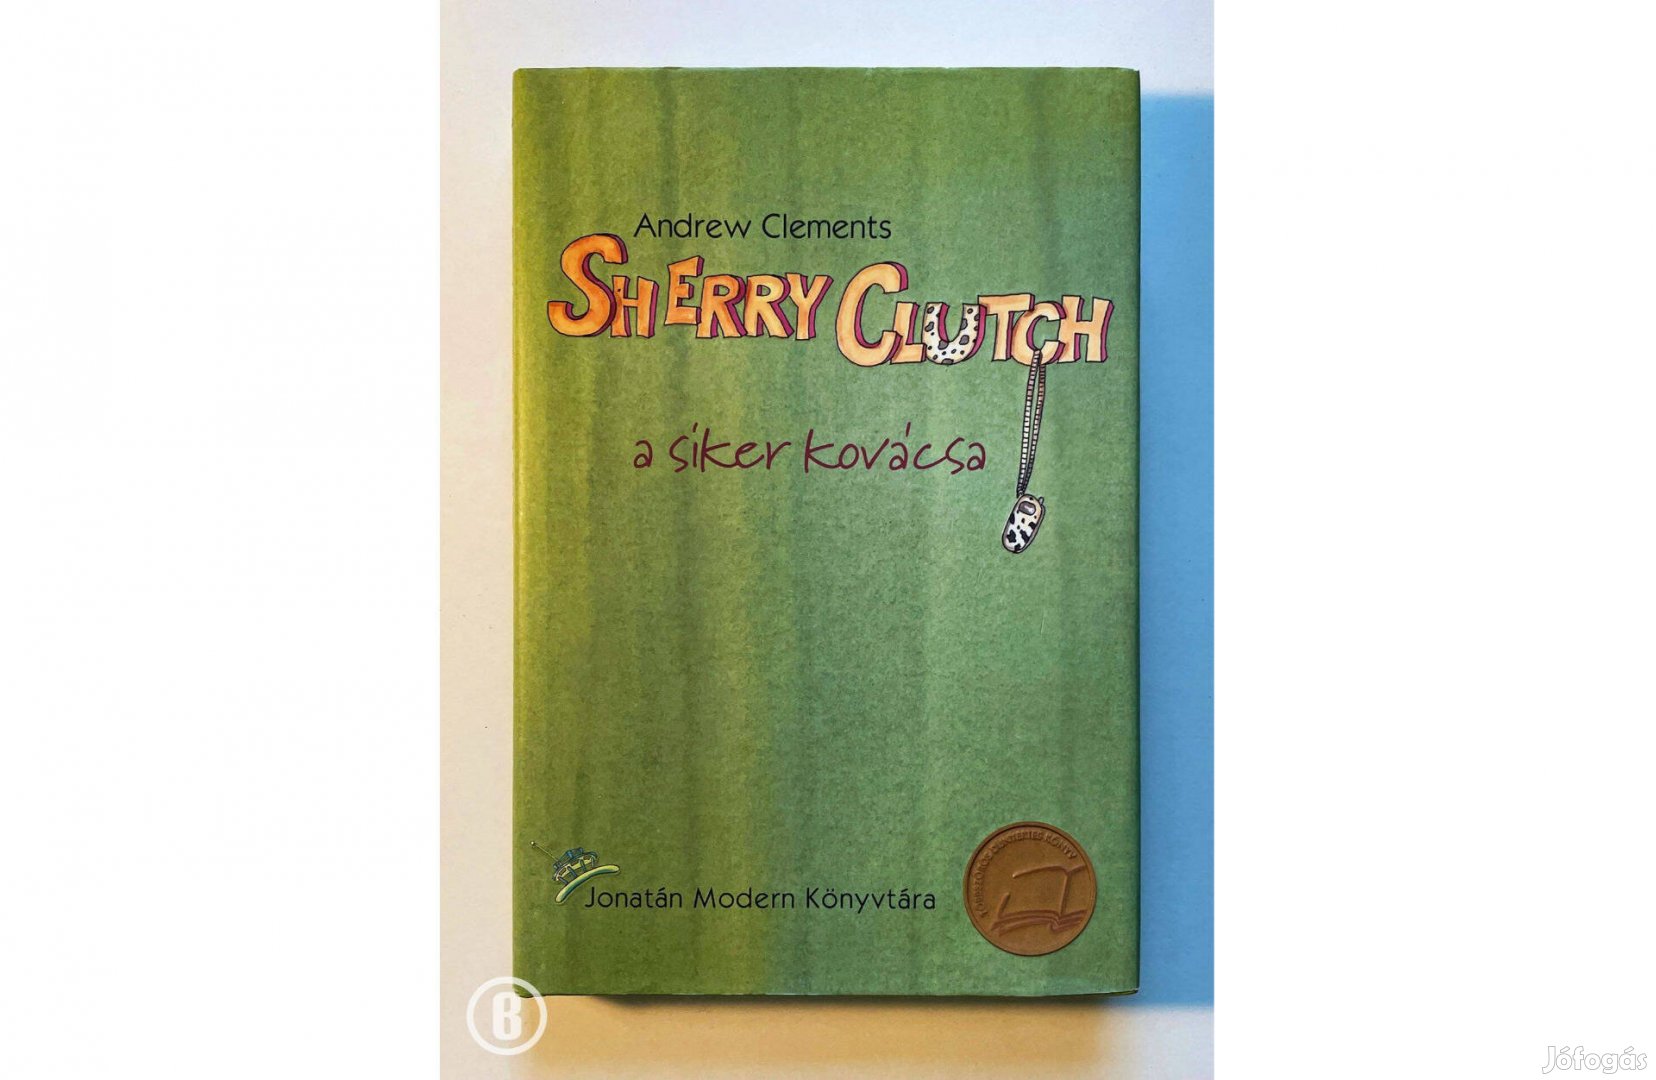 Andrew Clements: Sherry Clutch a siker kovácsa